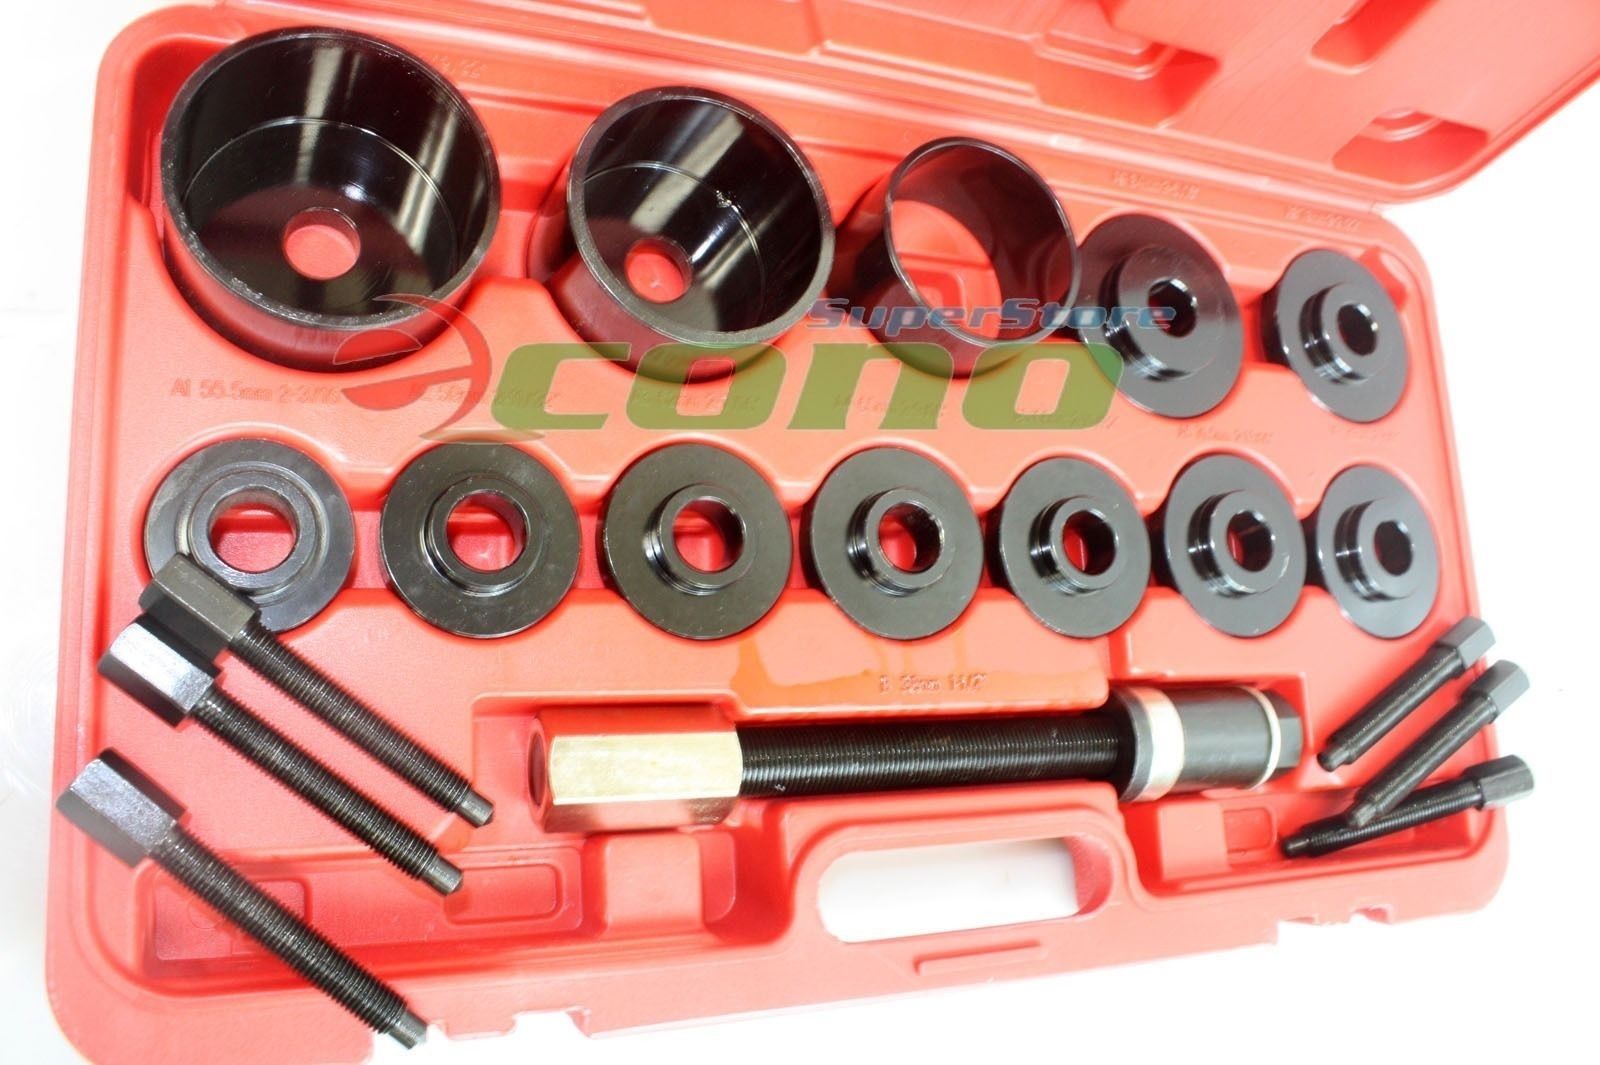 TRIL GEAR 19pcs Universal Master Set FWD Front Wheel Drive Bearing Puller Hub Removal Install Service Tool Kit 2-3/16 to 3-19/32 Drift Size